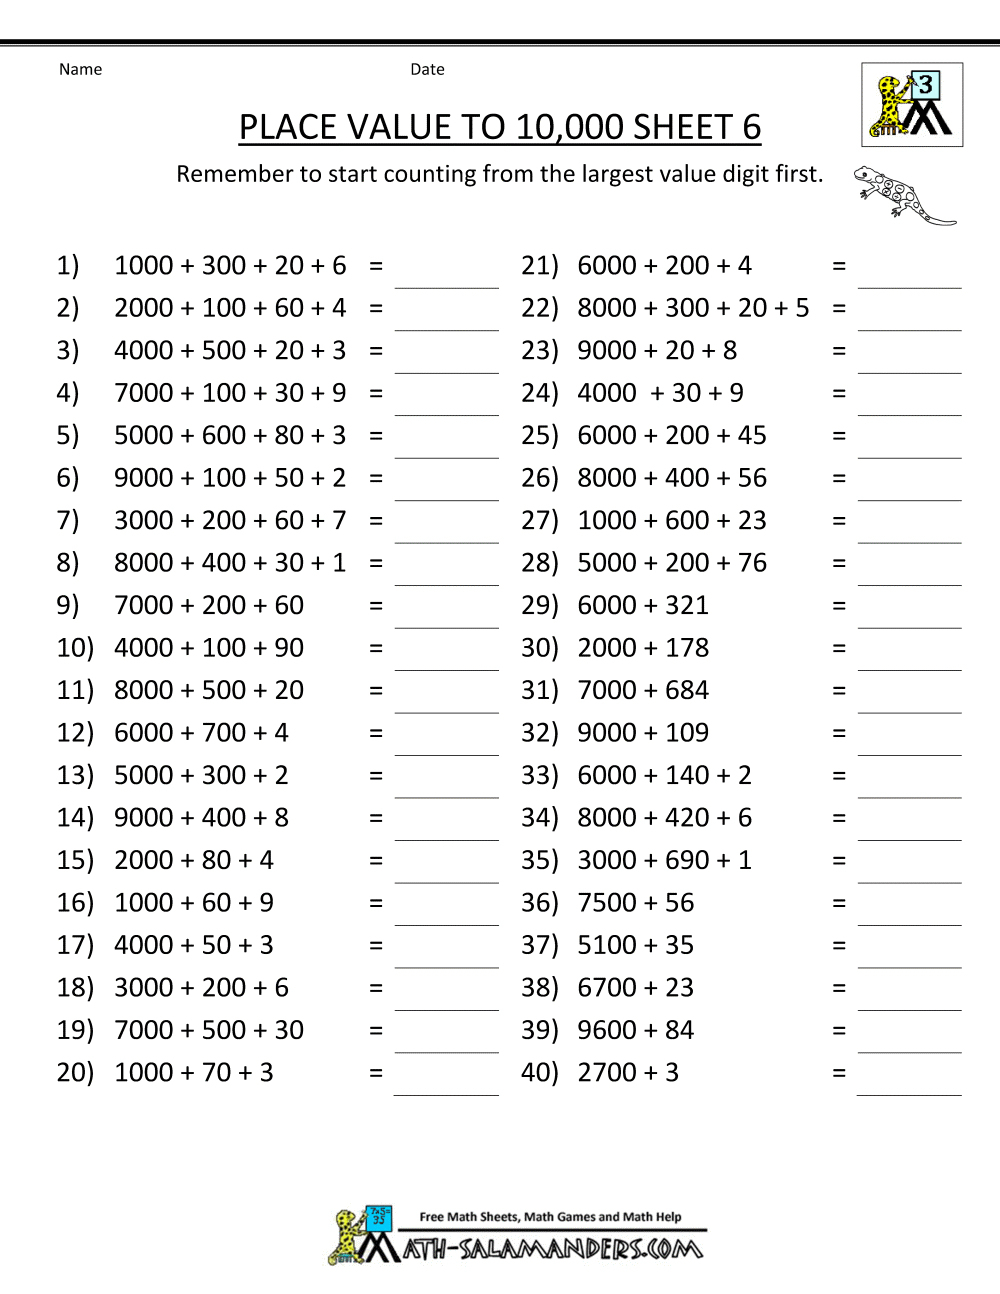 Printable Math Worksheets For Grade 6 All Download Worksheet - Year 6 Maths Worksheets Free Printable